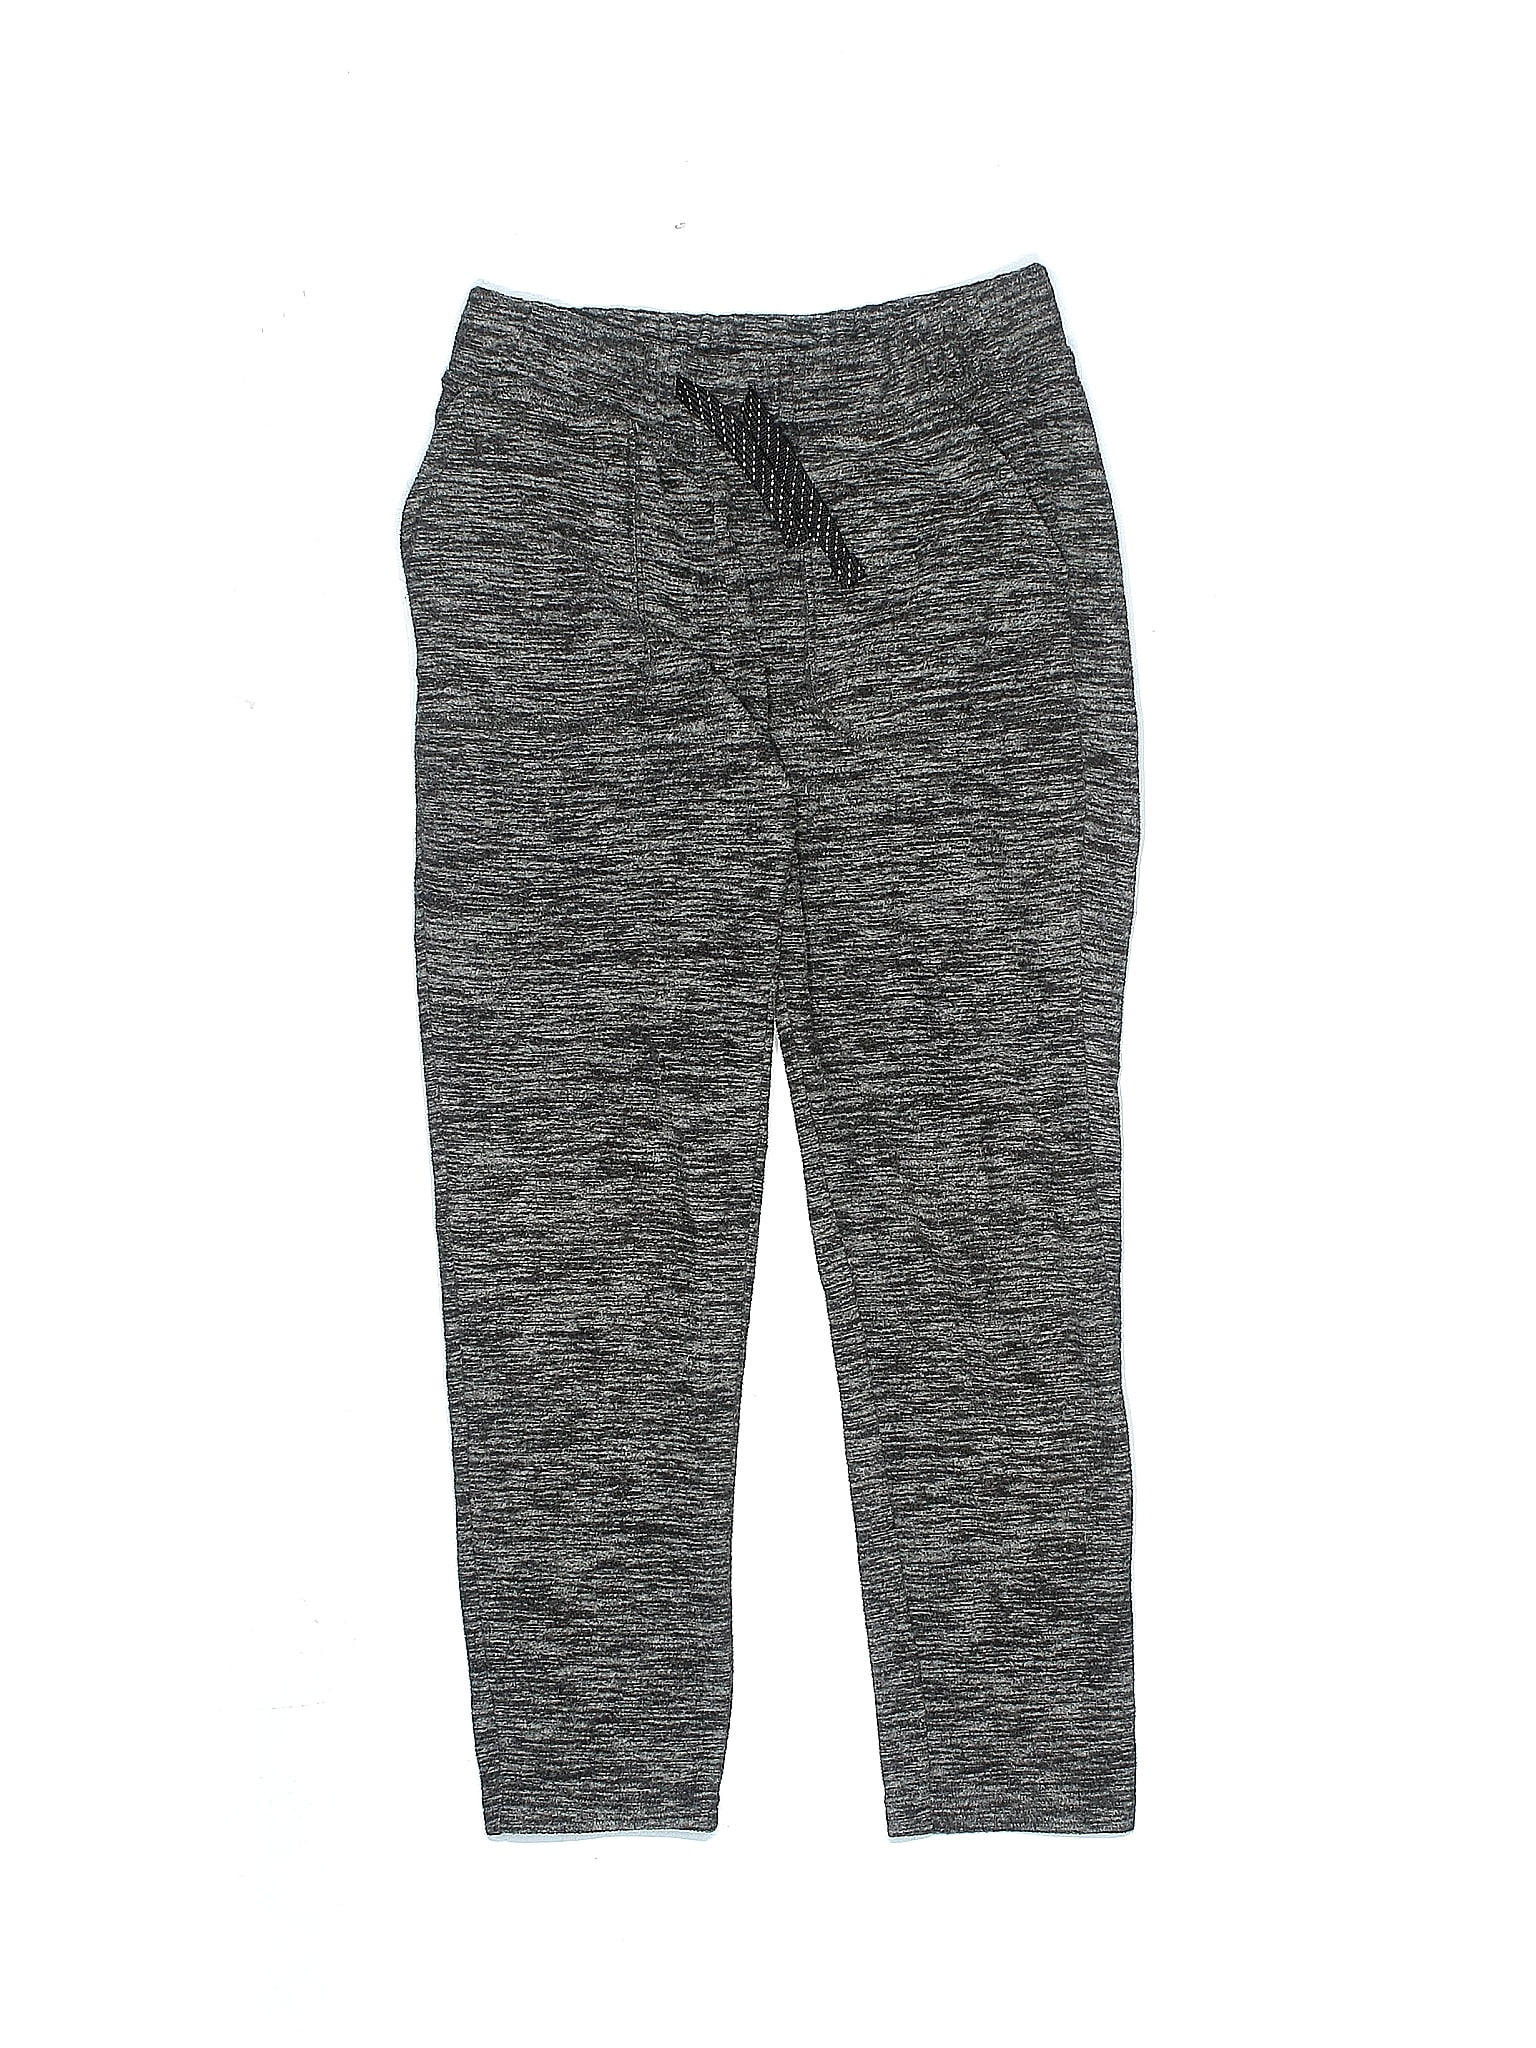 Avia Solid Black Active Pants Size M - 36% off